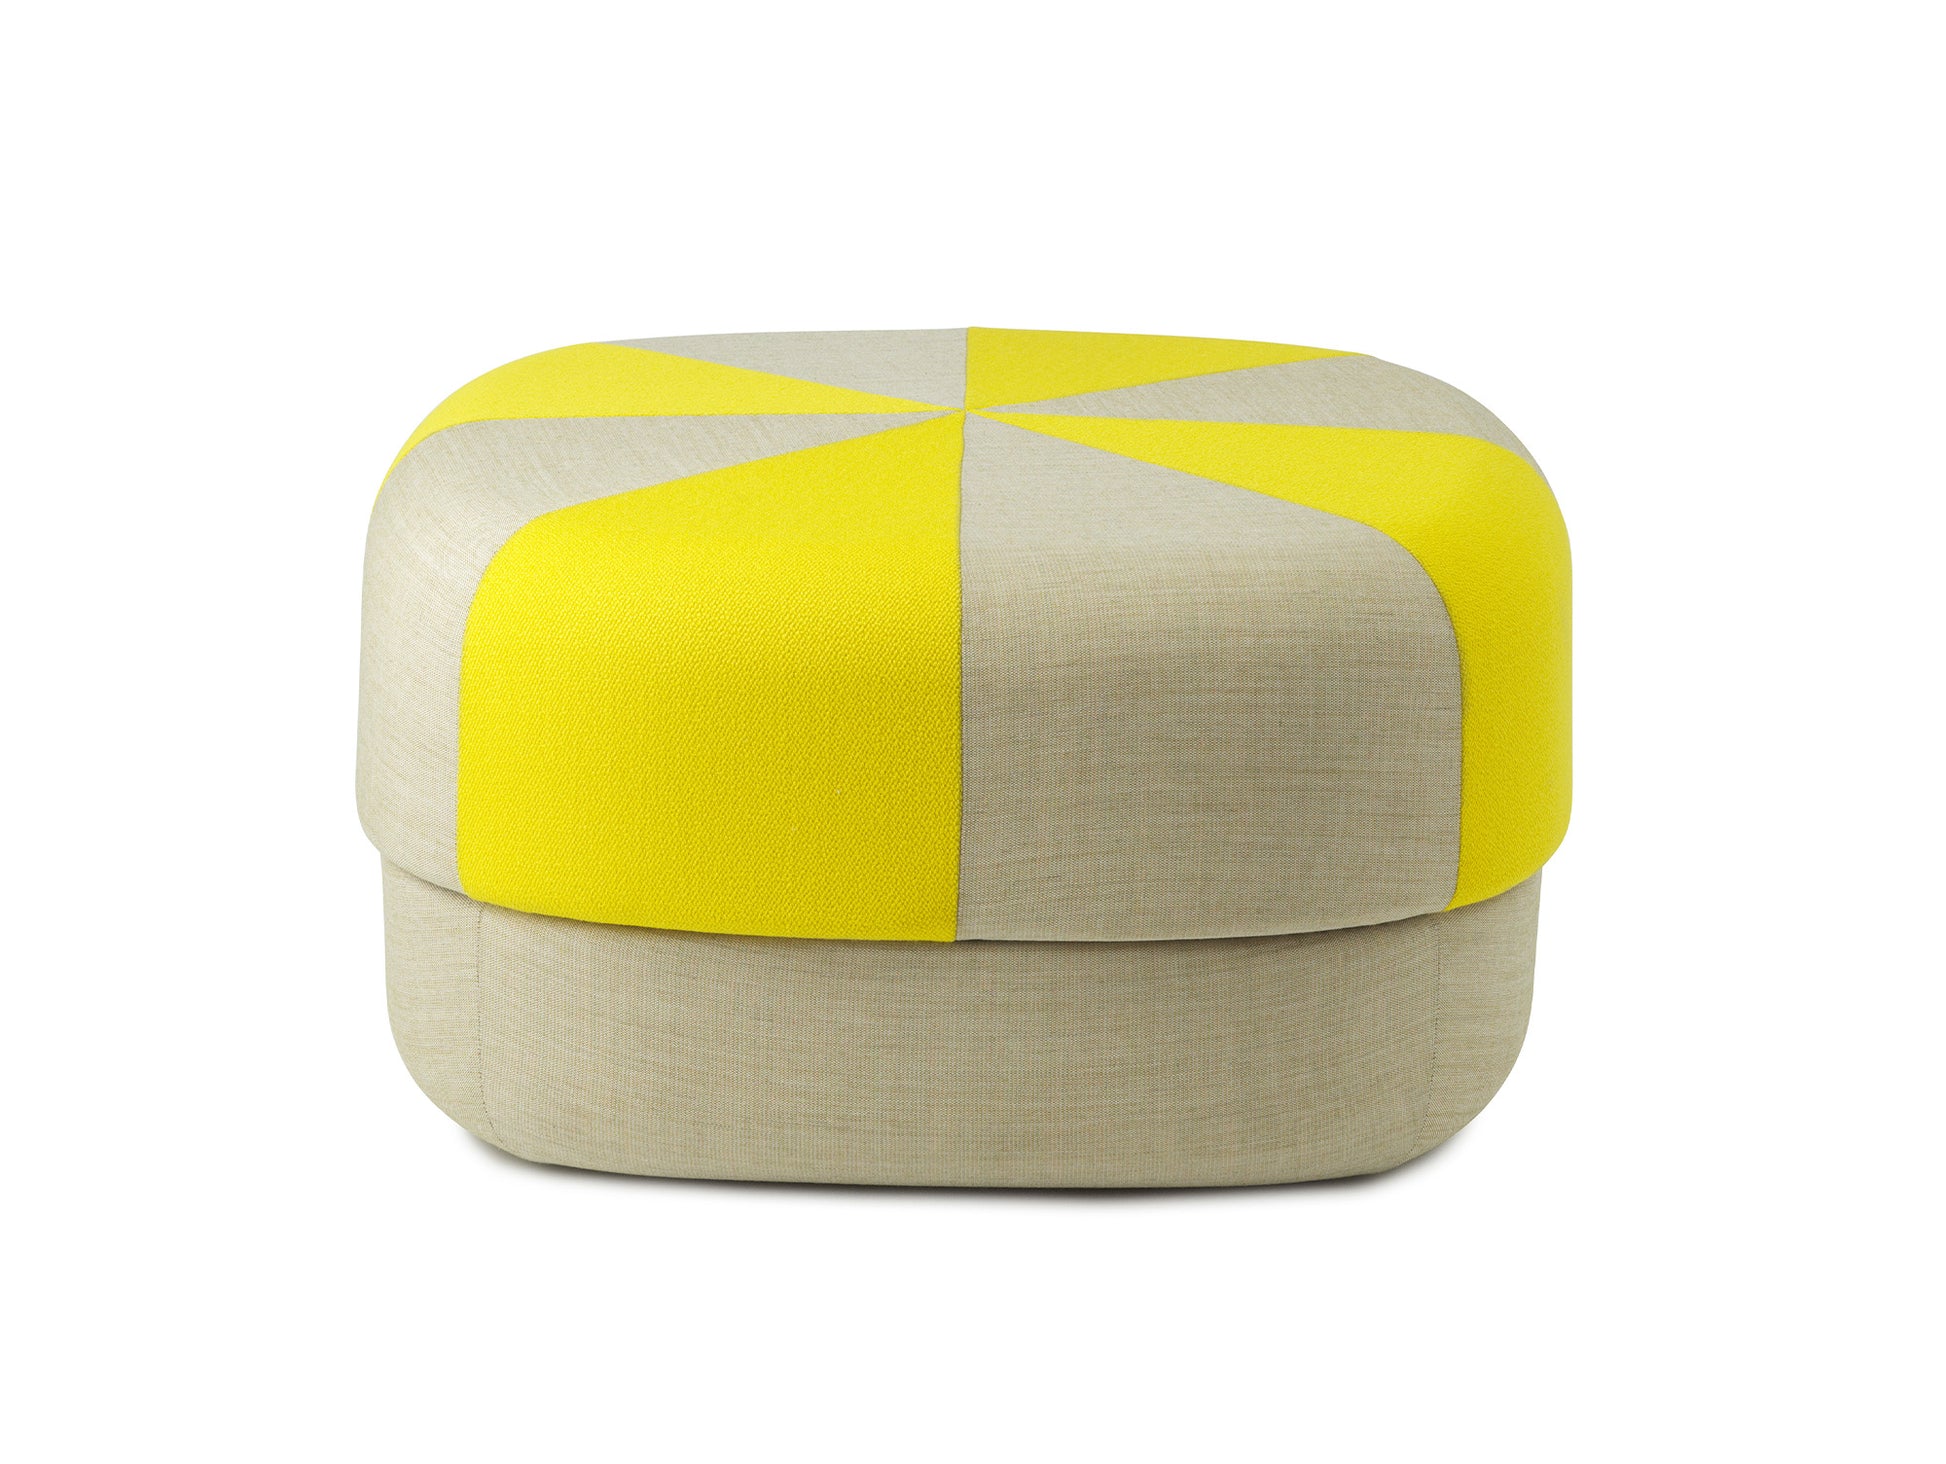 Circus Pouf Duo by Normann Copenhagen - Large / Yellow